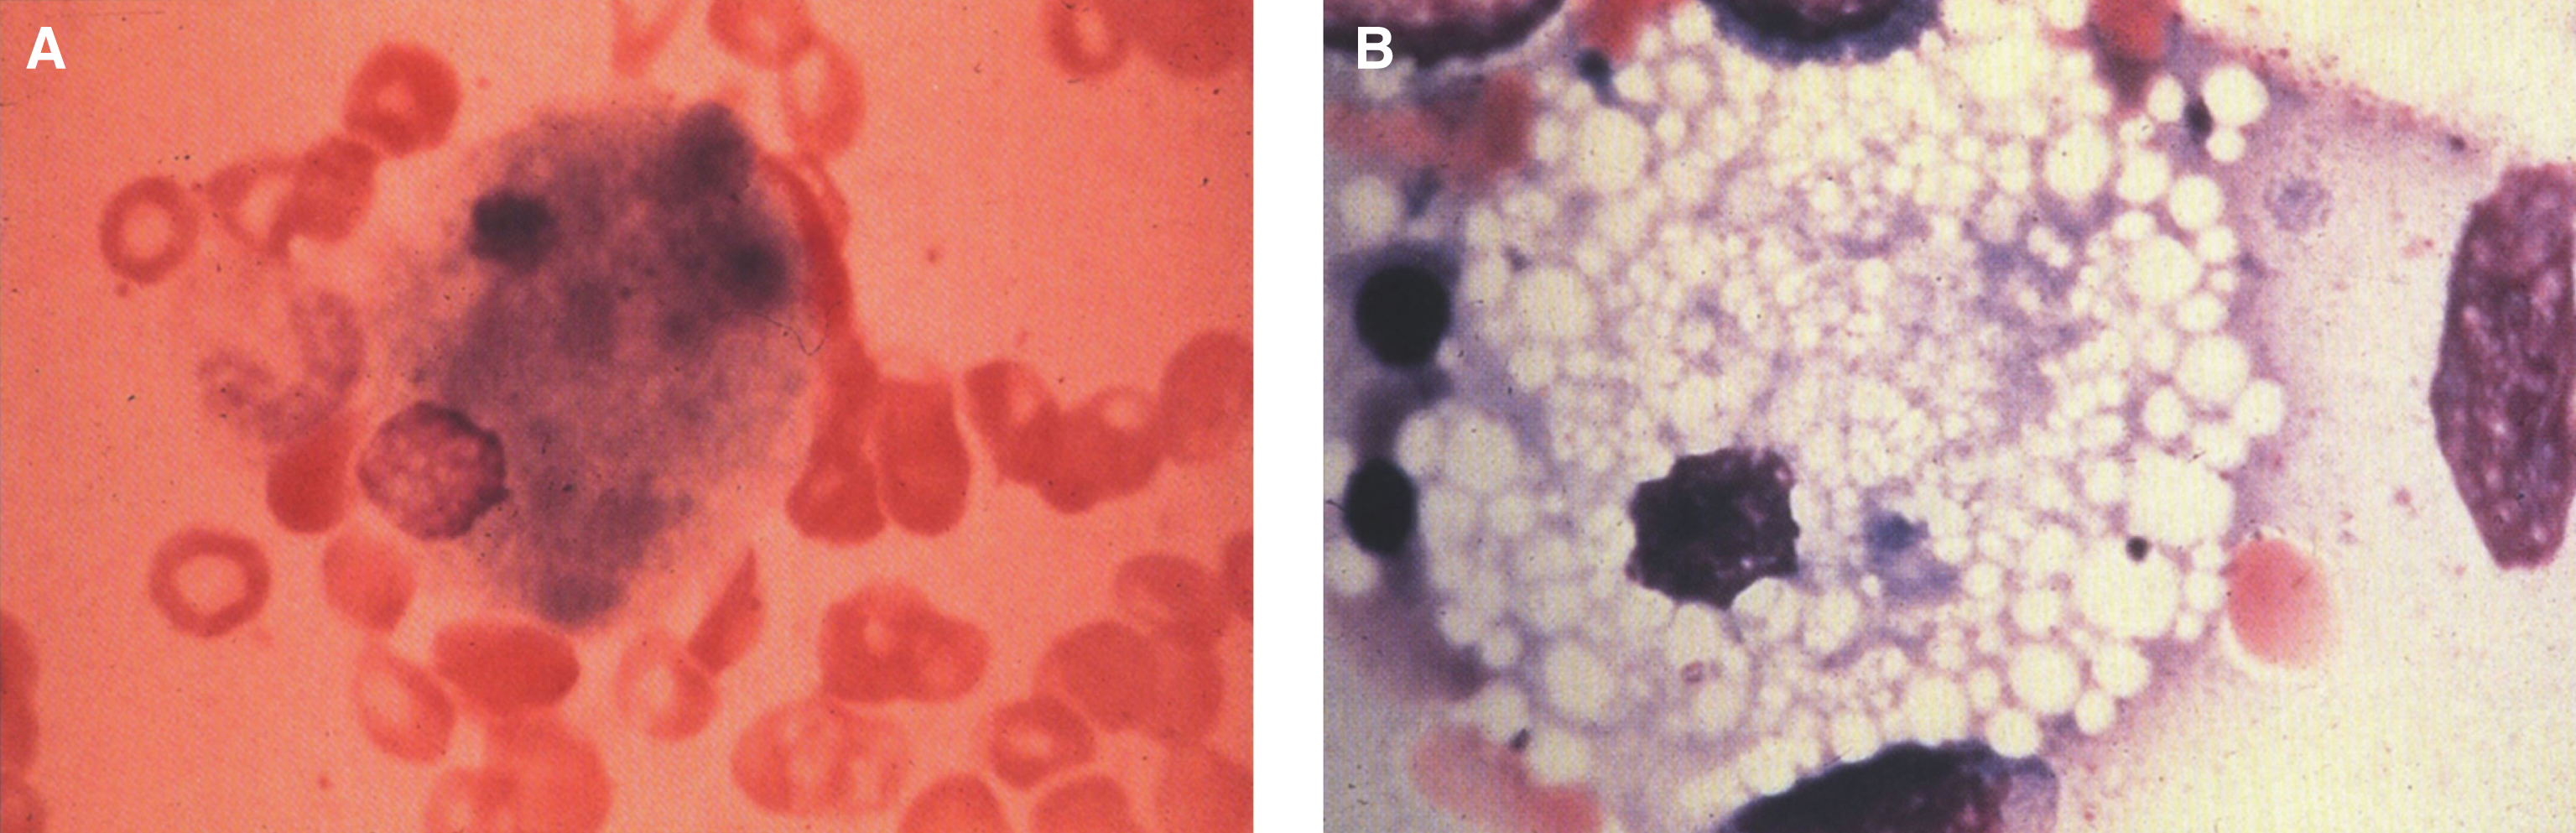 Niemann-Pick disease. (A) A sea-blue histiocyte is present in the marrow. These cells are predominantly seen in types C and F. (B) A histiocyte in the bone marrow has a “soap-bubble” appearance and measures 60 to 80 μm in diameter.